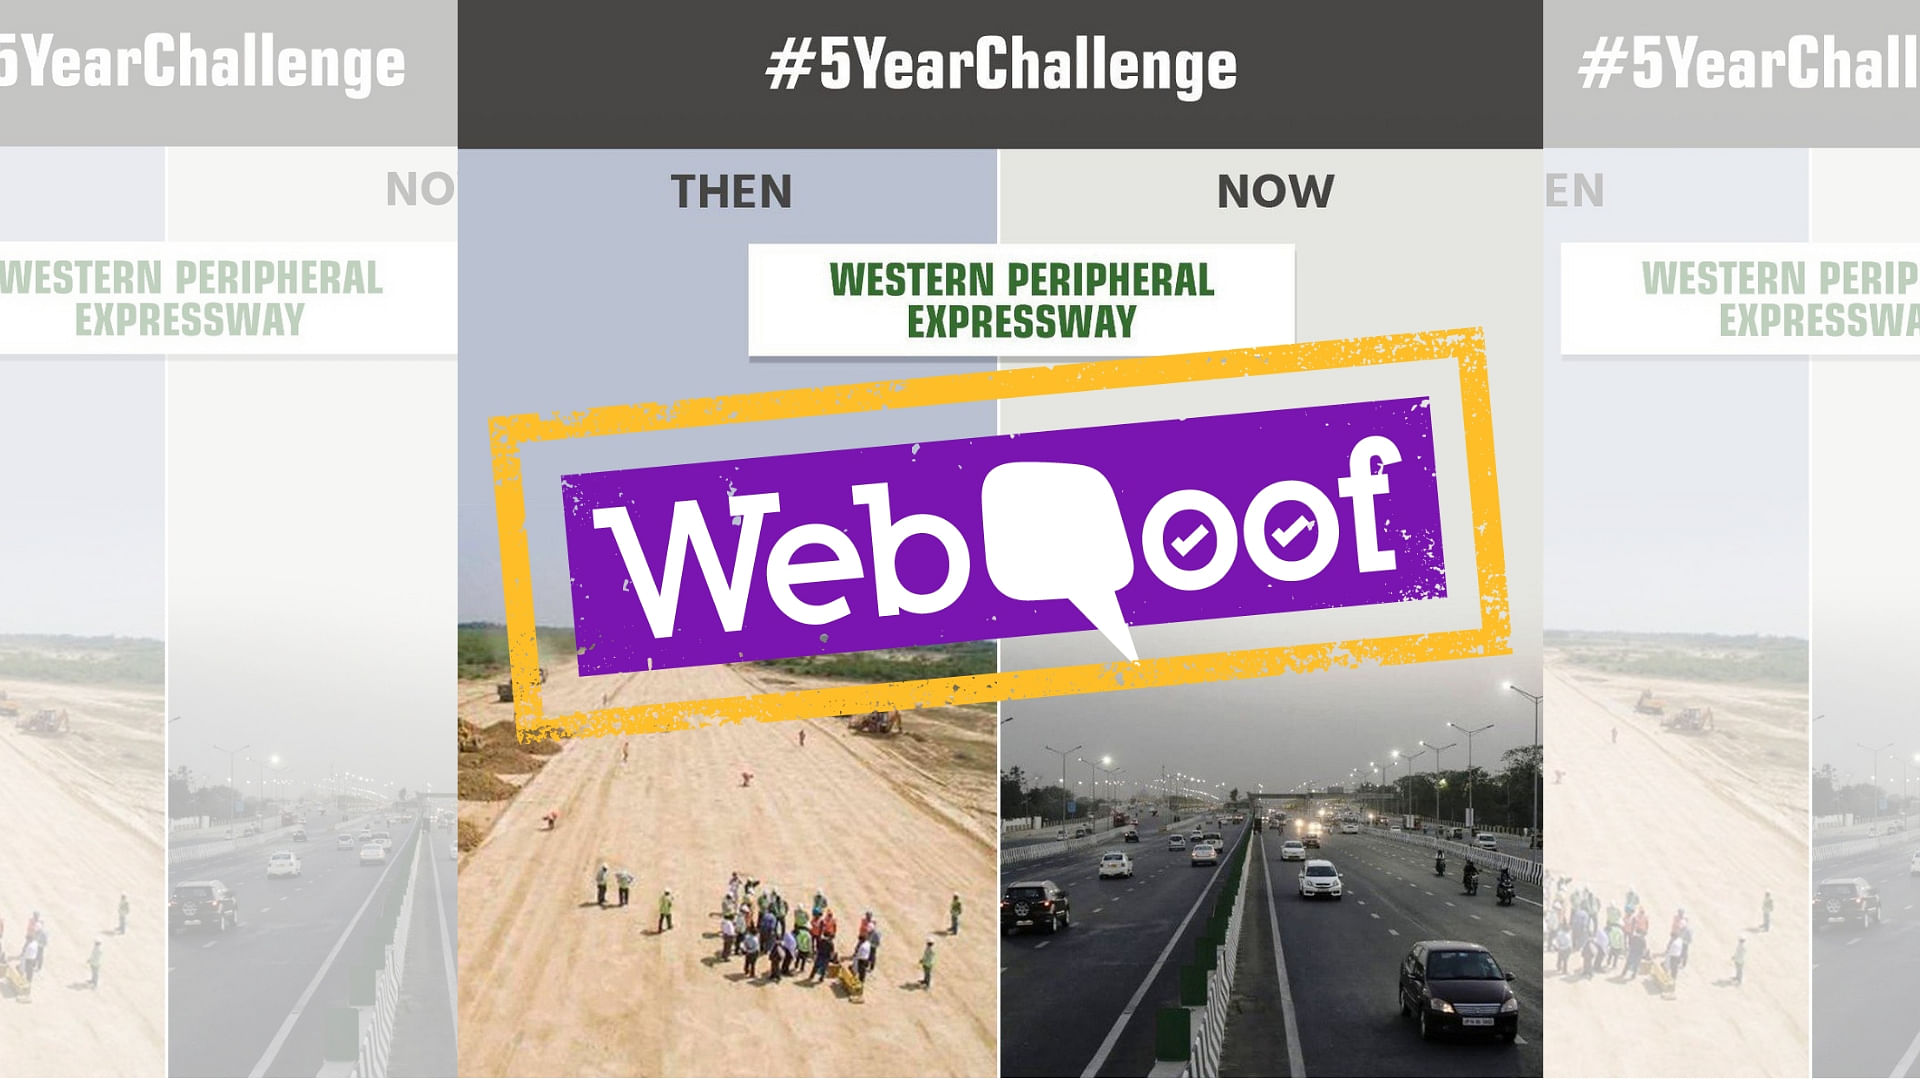 A recent BJP tweet, as part of its #5YearChallenge, showcasing the progress of the Western Peripheral Expressway used incorrect images.